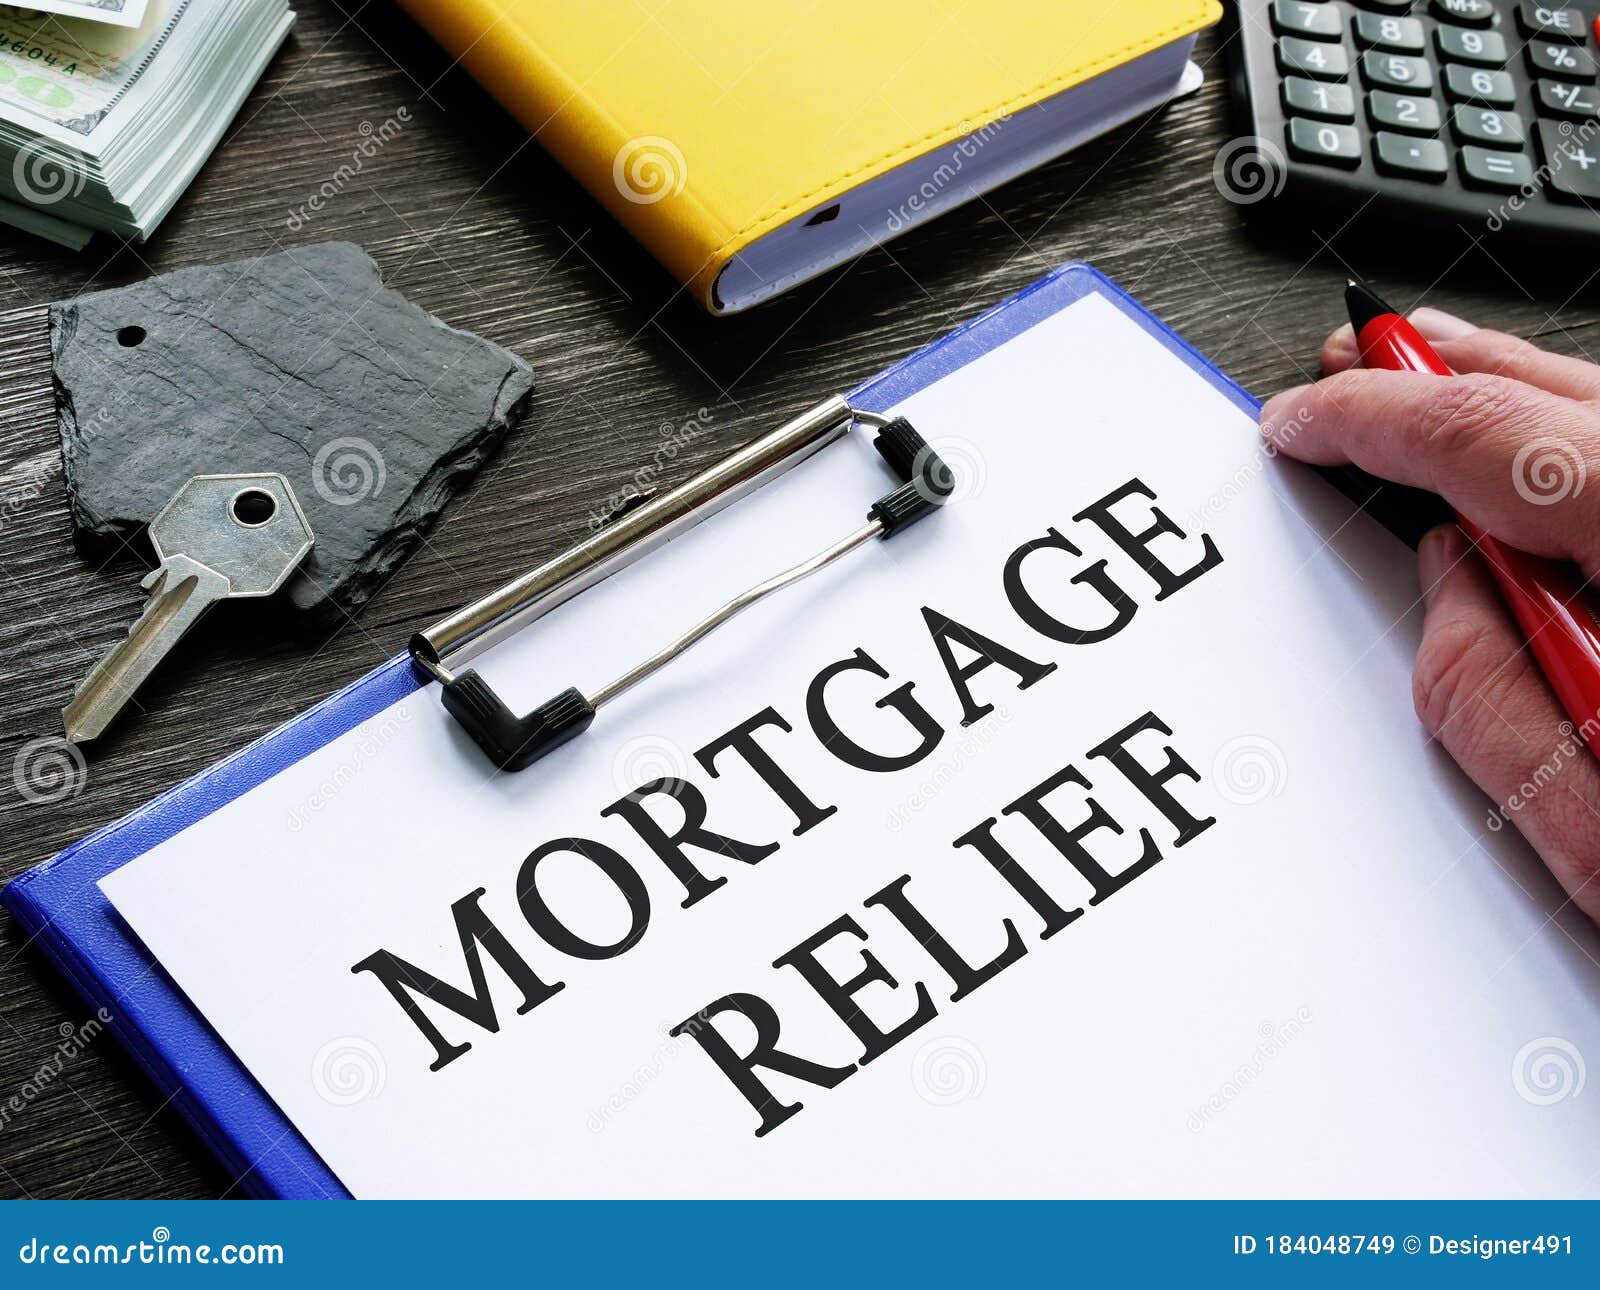 mortgage relief application and key from home